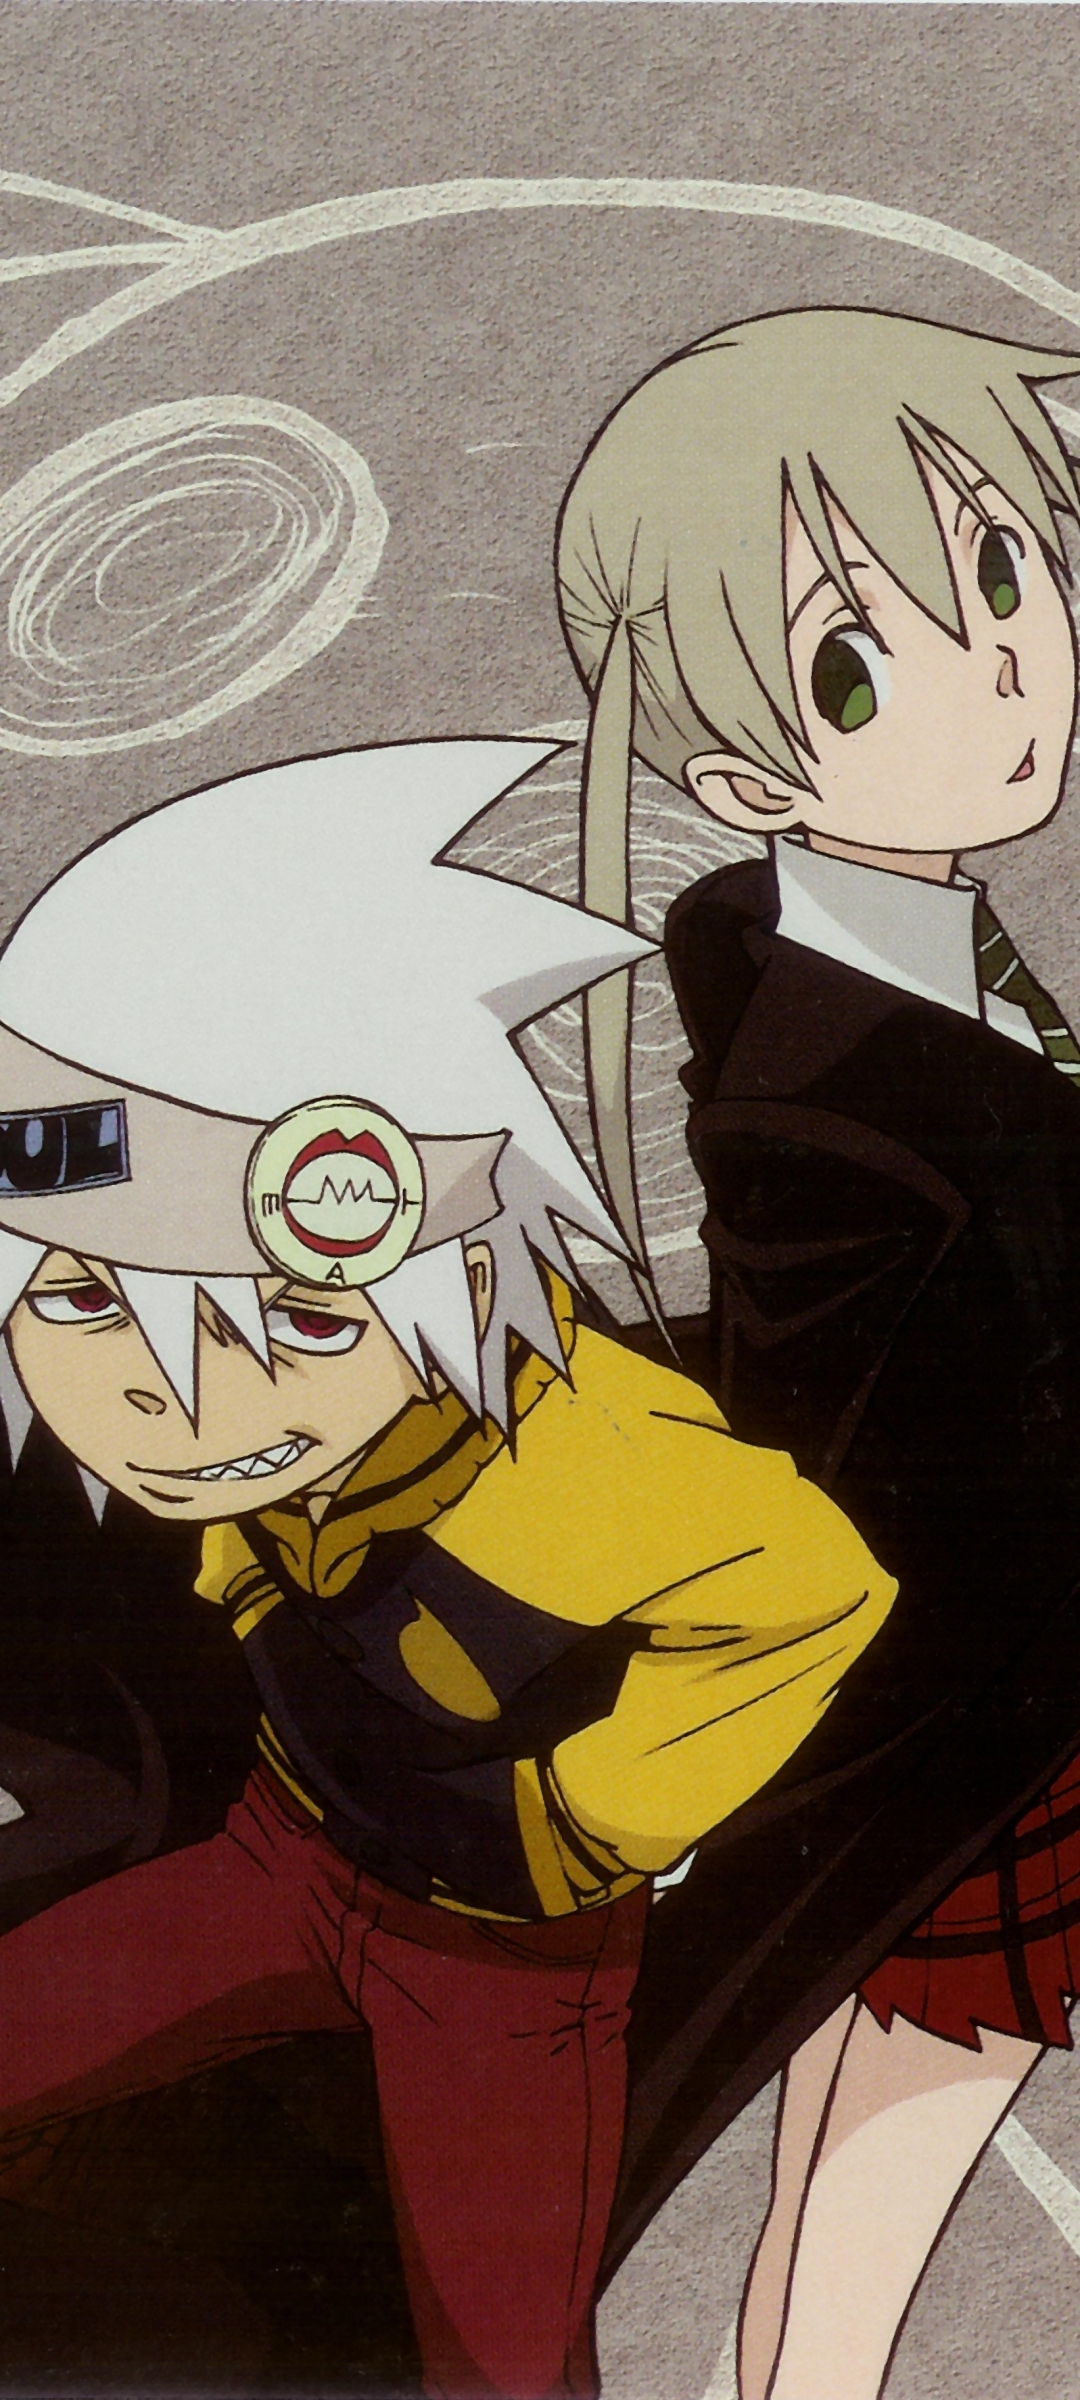 Wake Up - Death the Kid x Black Star (Soul Eater) | Random Anime One Shots  Part 2! (Discontinued) | Quotev